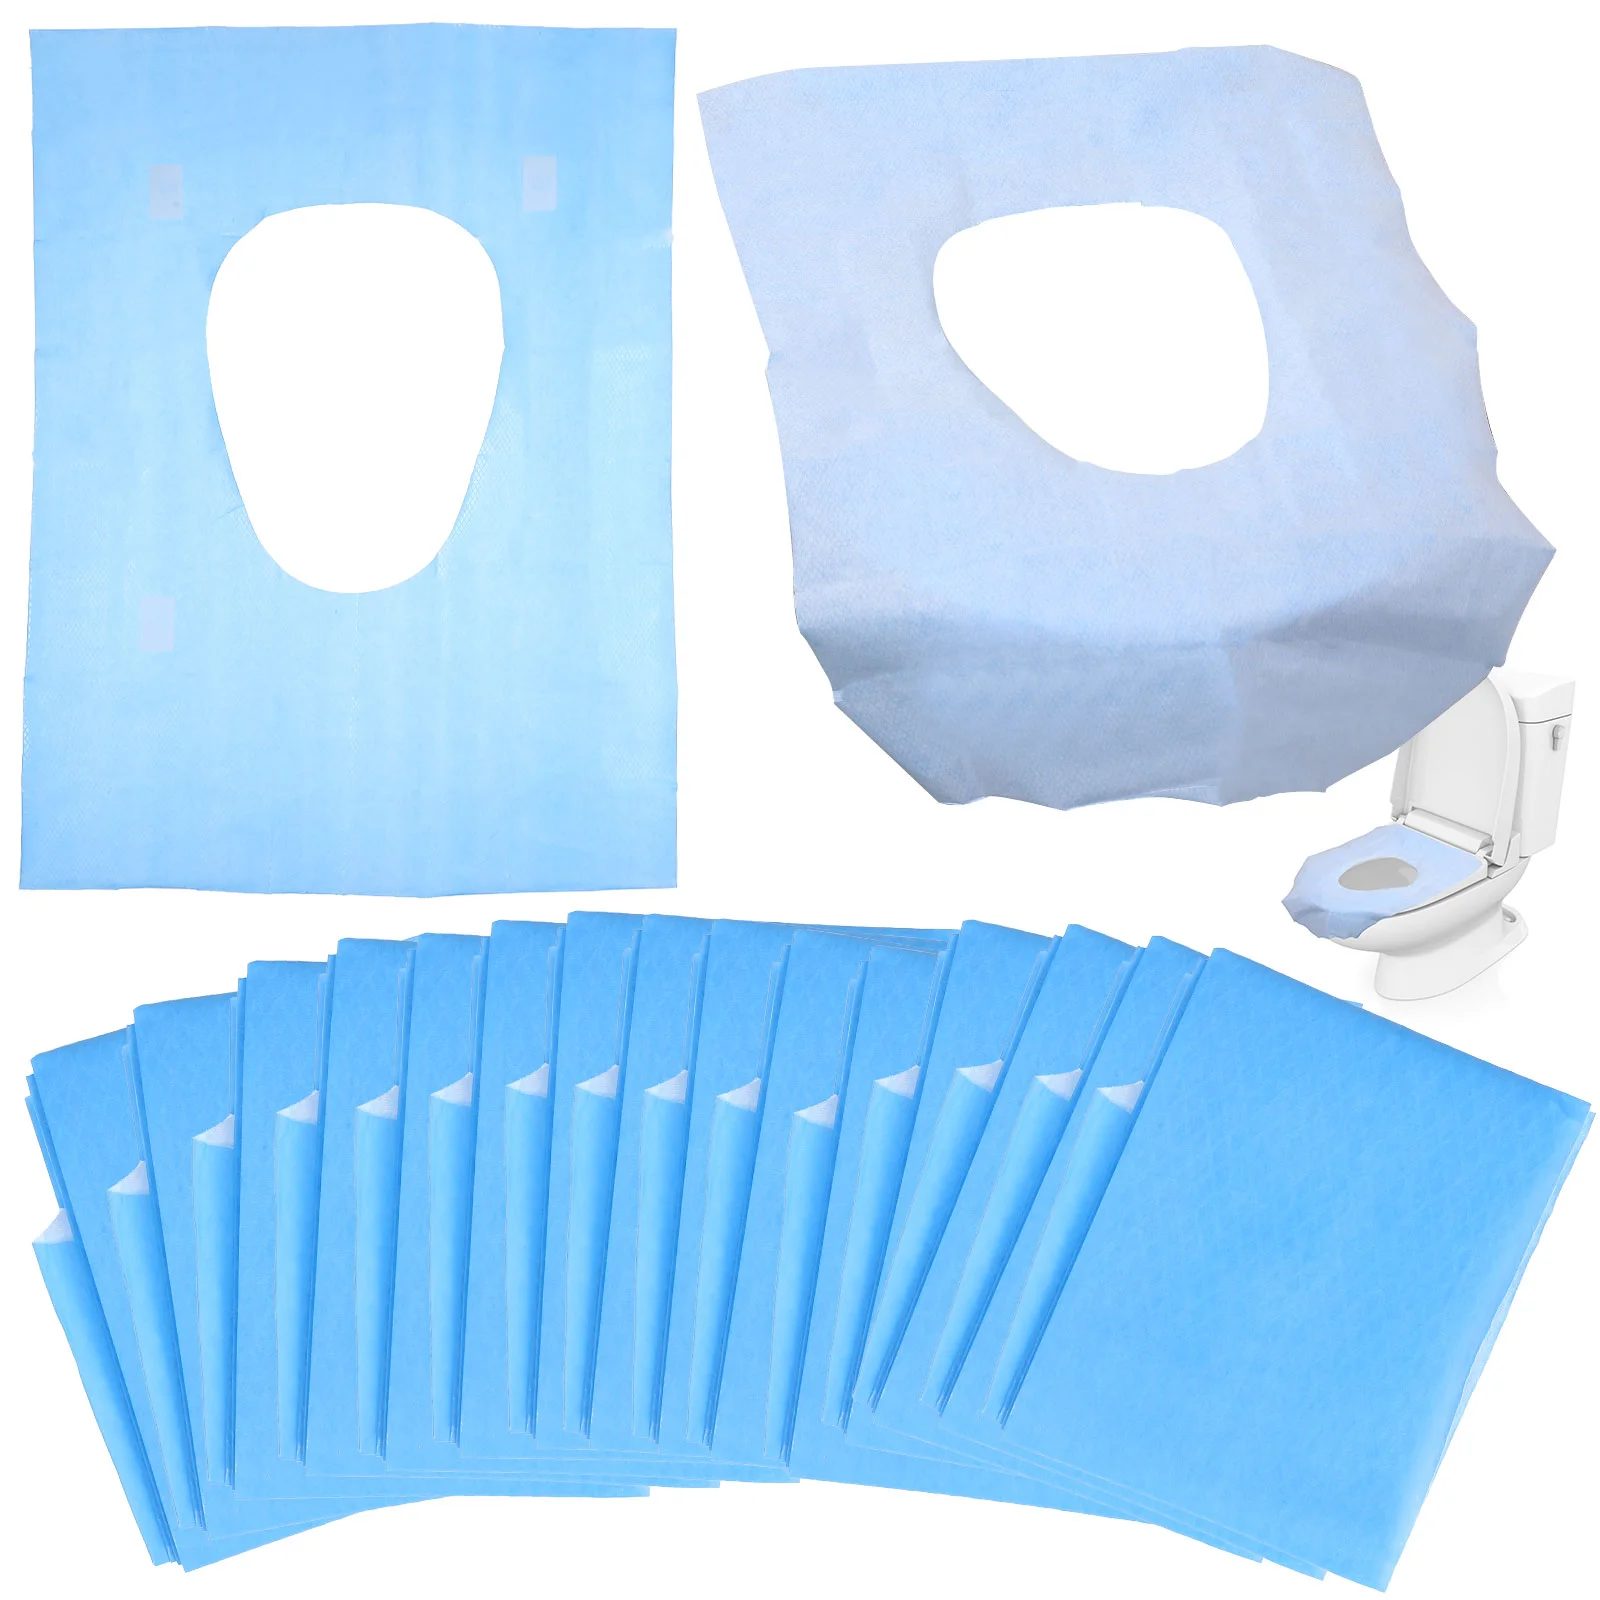 60 Pcs Disposable Toilet Seat Travel Cover Seats Kids Plane Cushion Portable Water Proof Covers Airplane